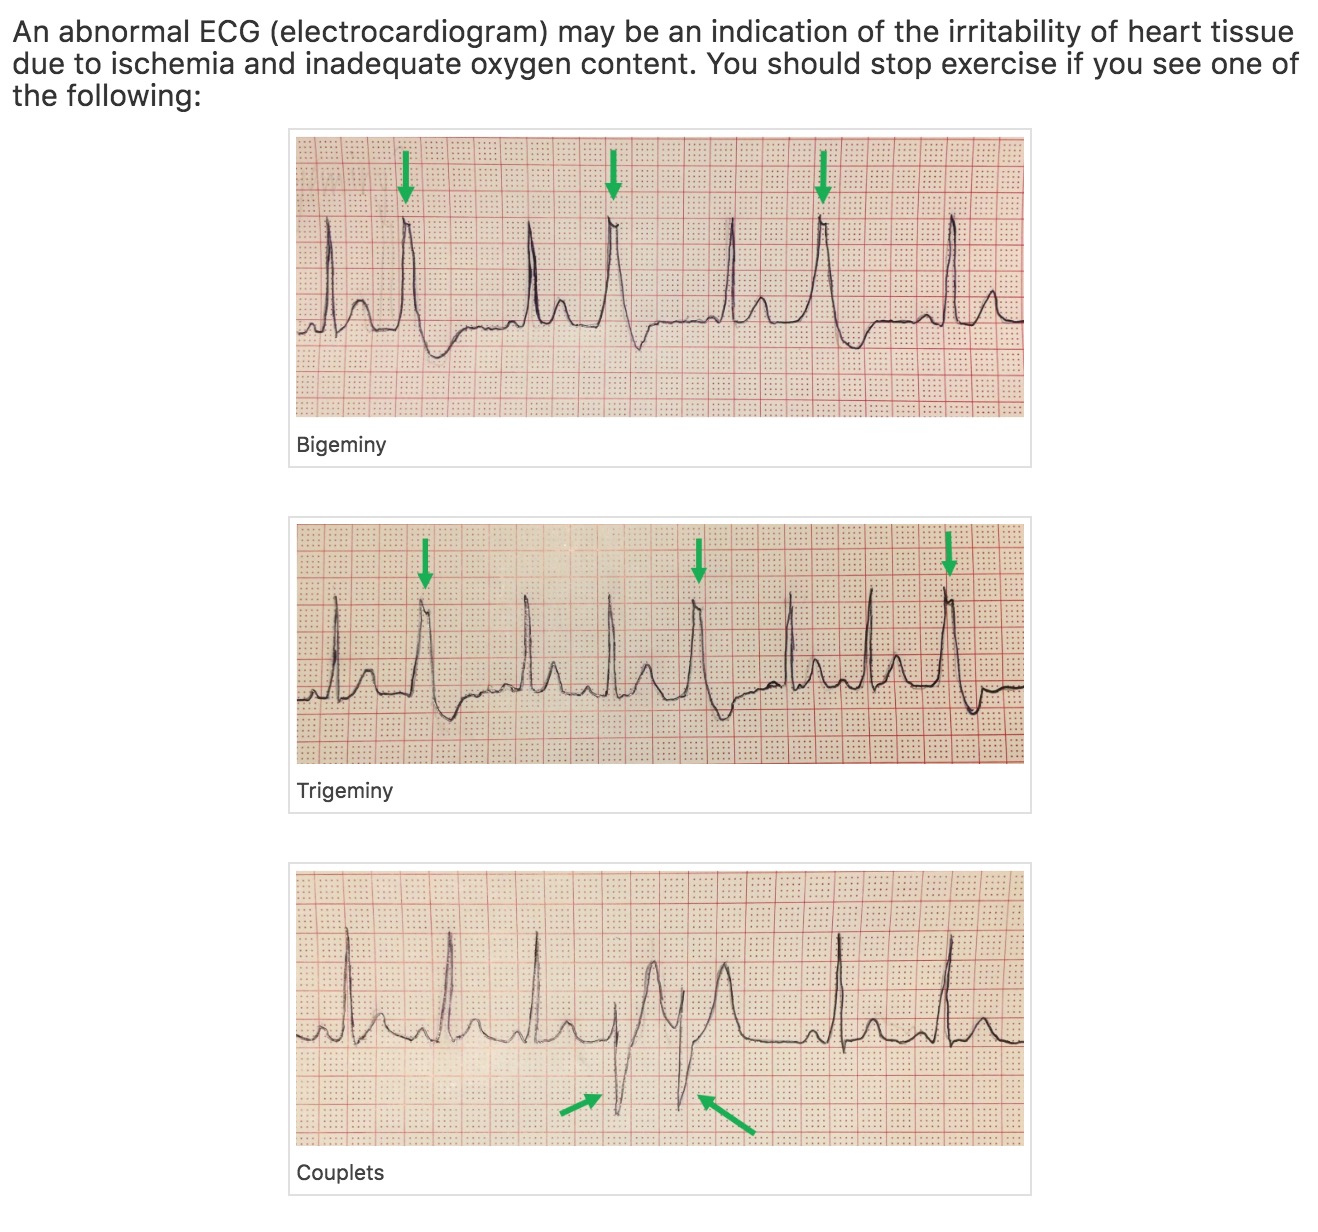 Recognize key ECG patterns for stopping exercise